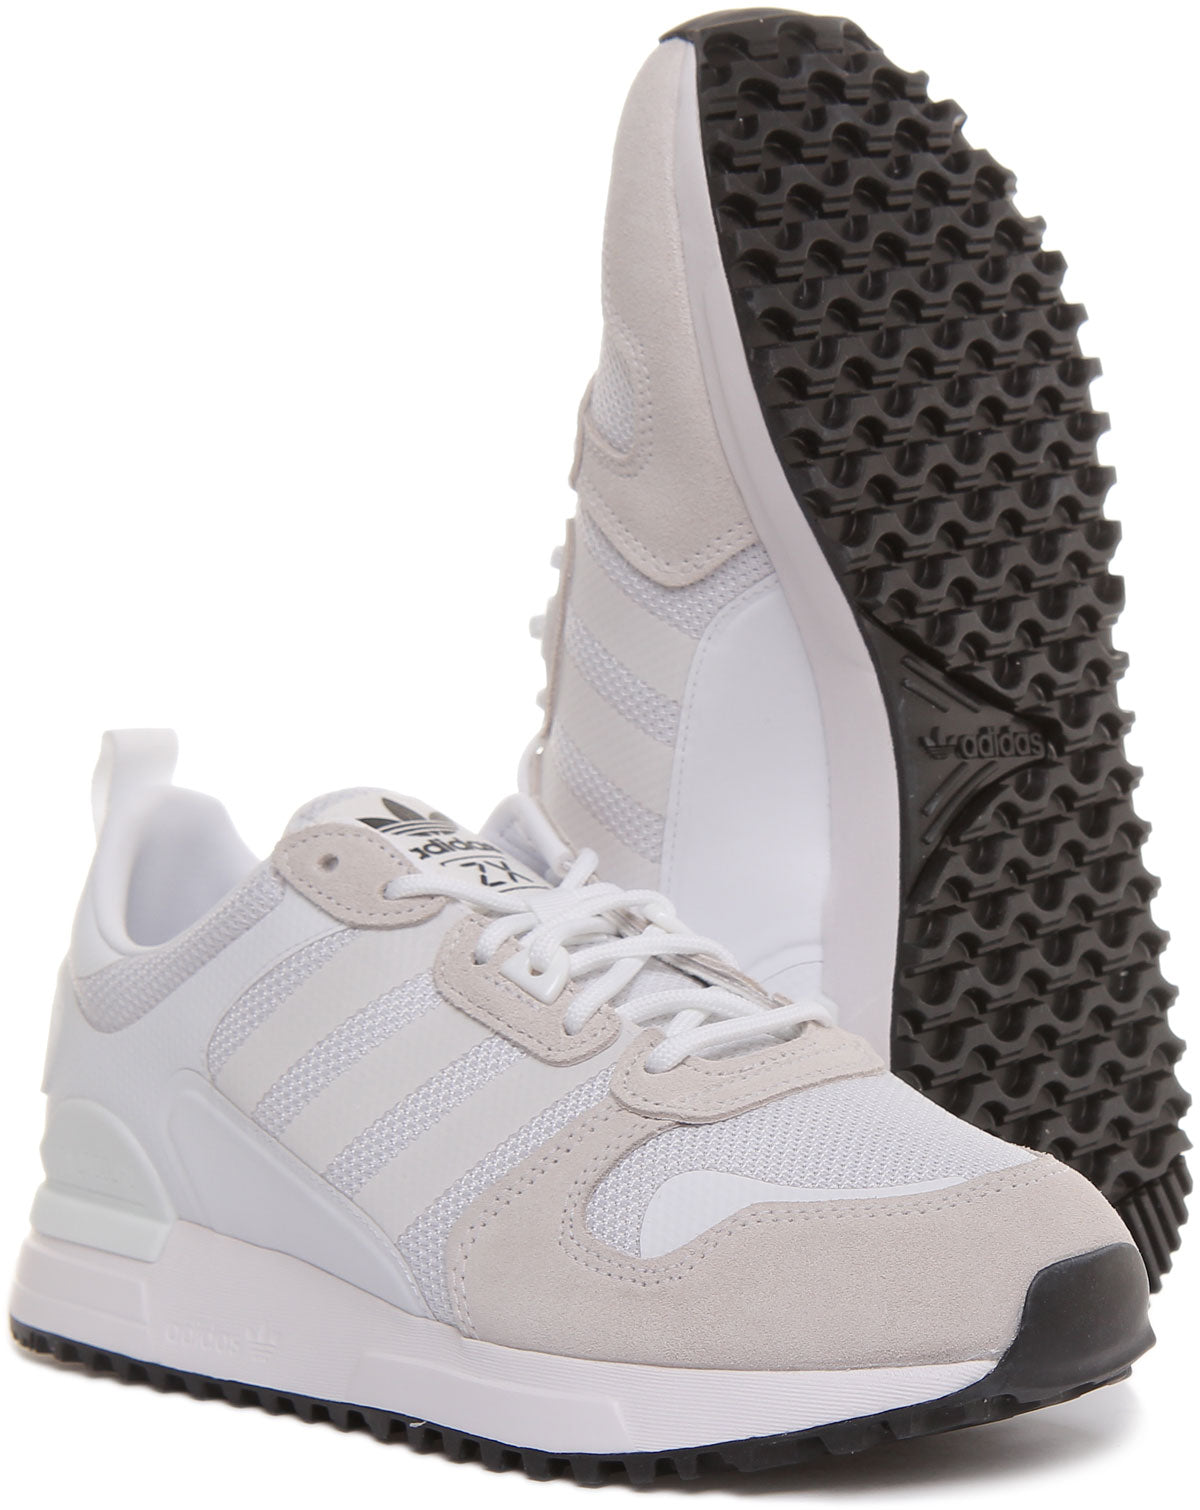 Adidas Zx 700 Hd In White For Men